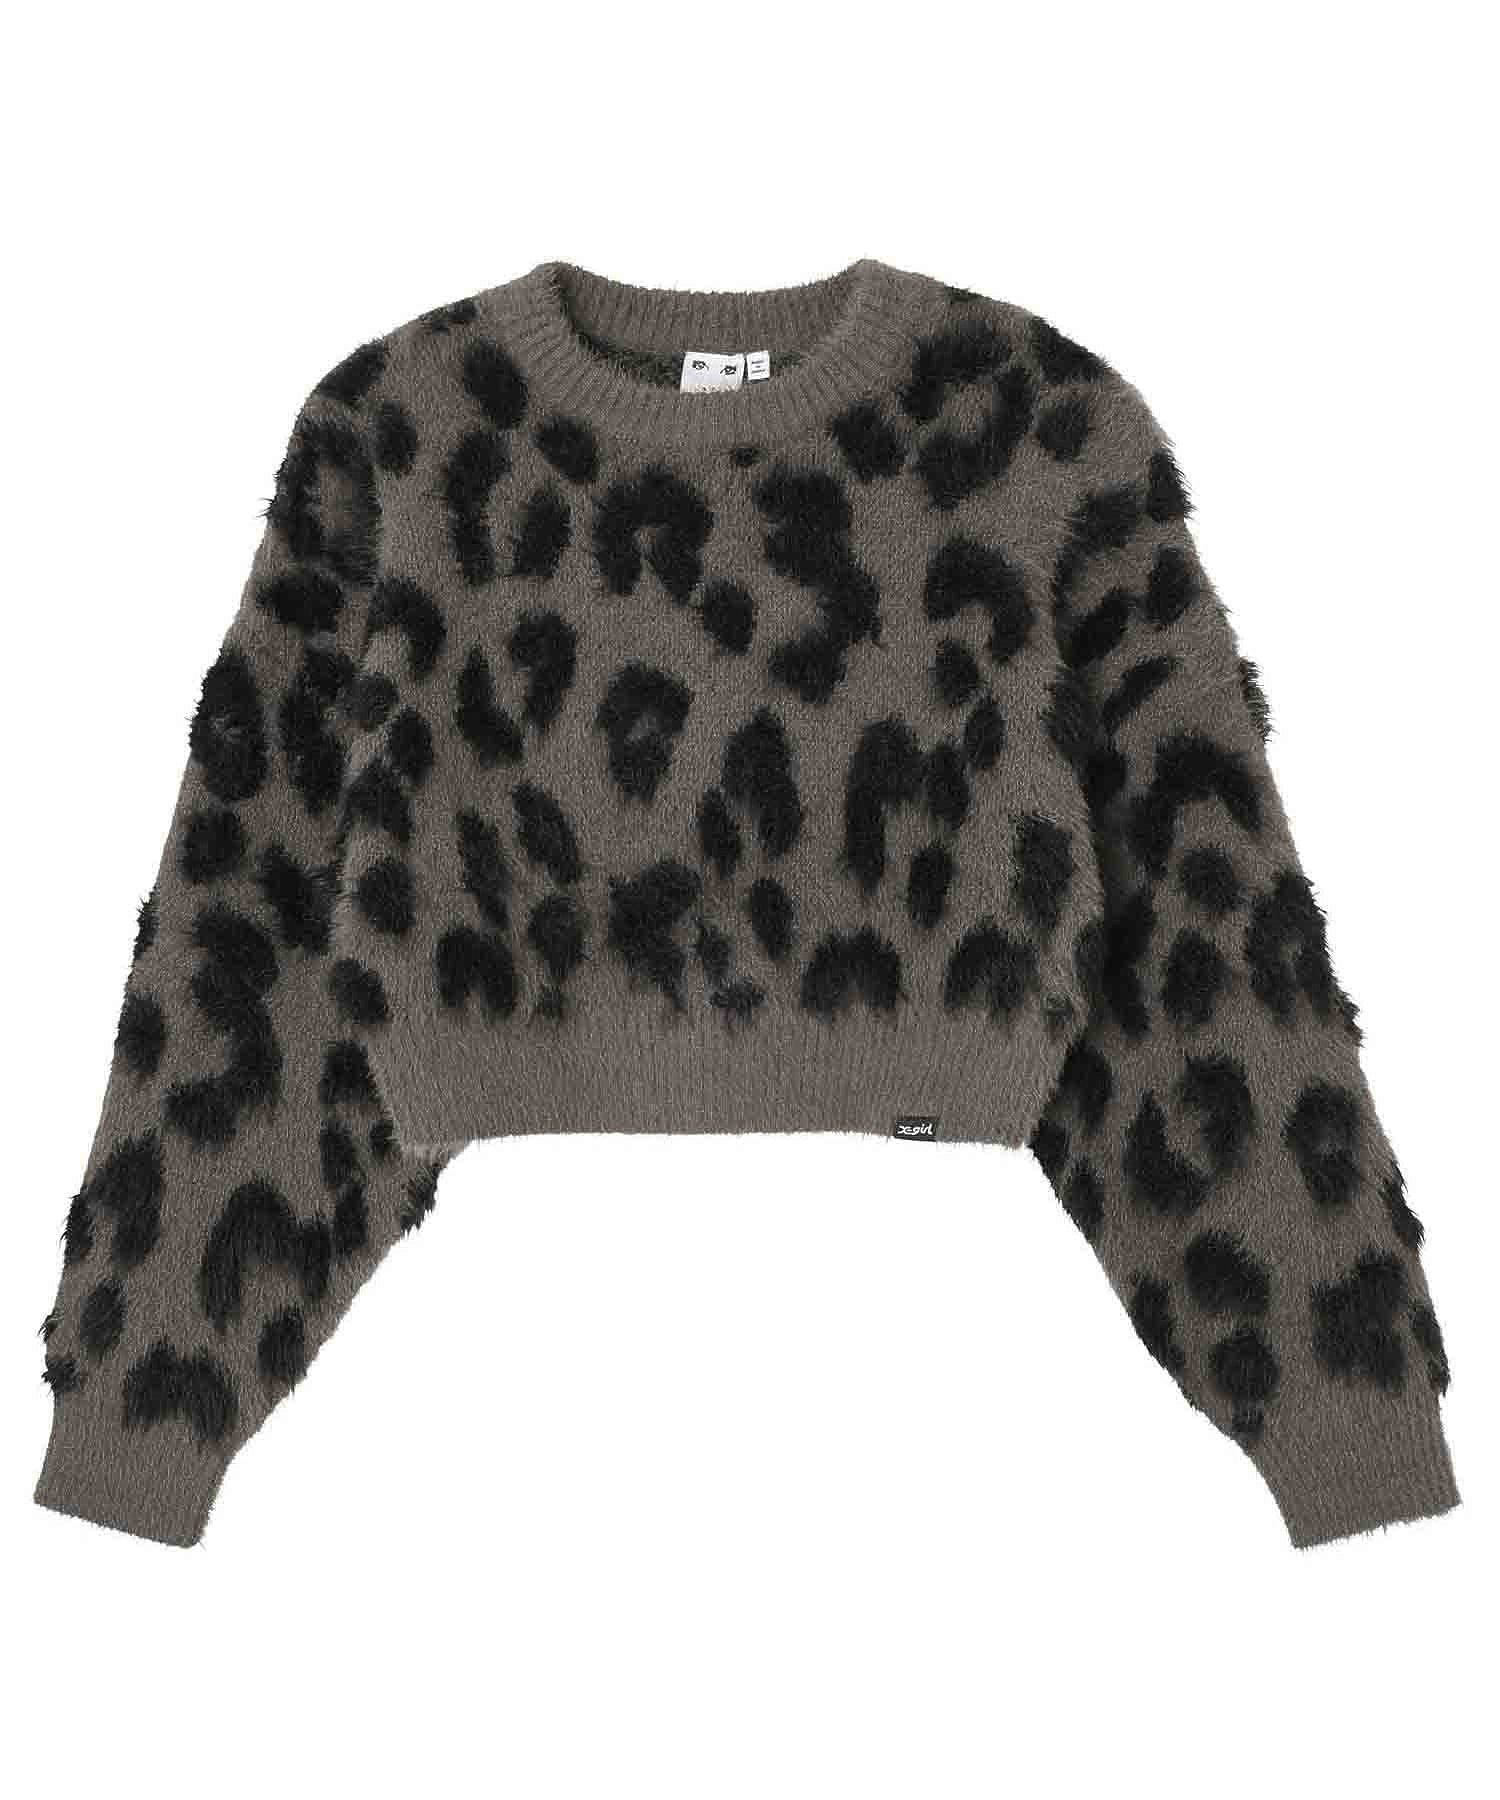 LEOPARD CROPPED KNIT TOP X-girl